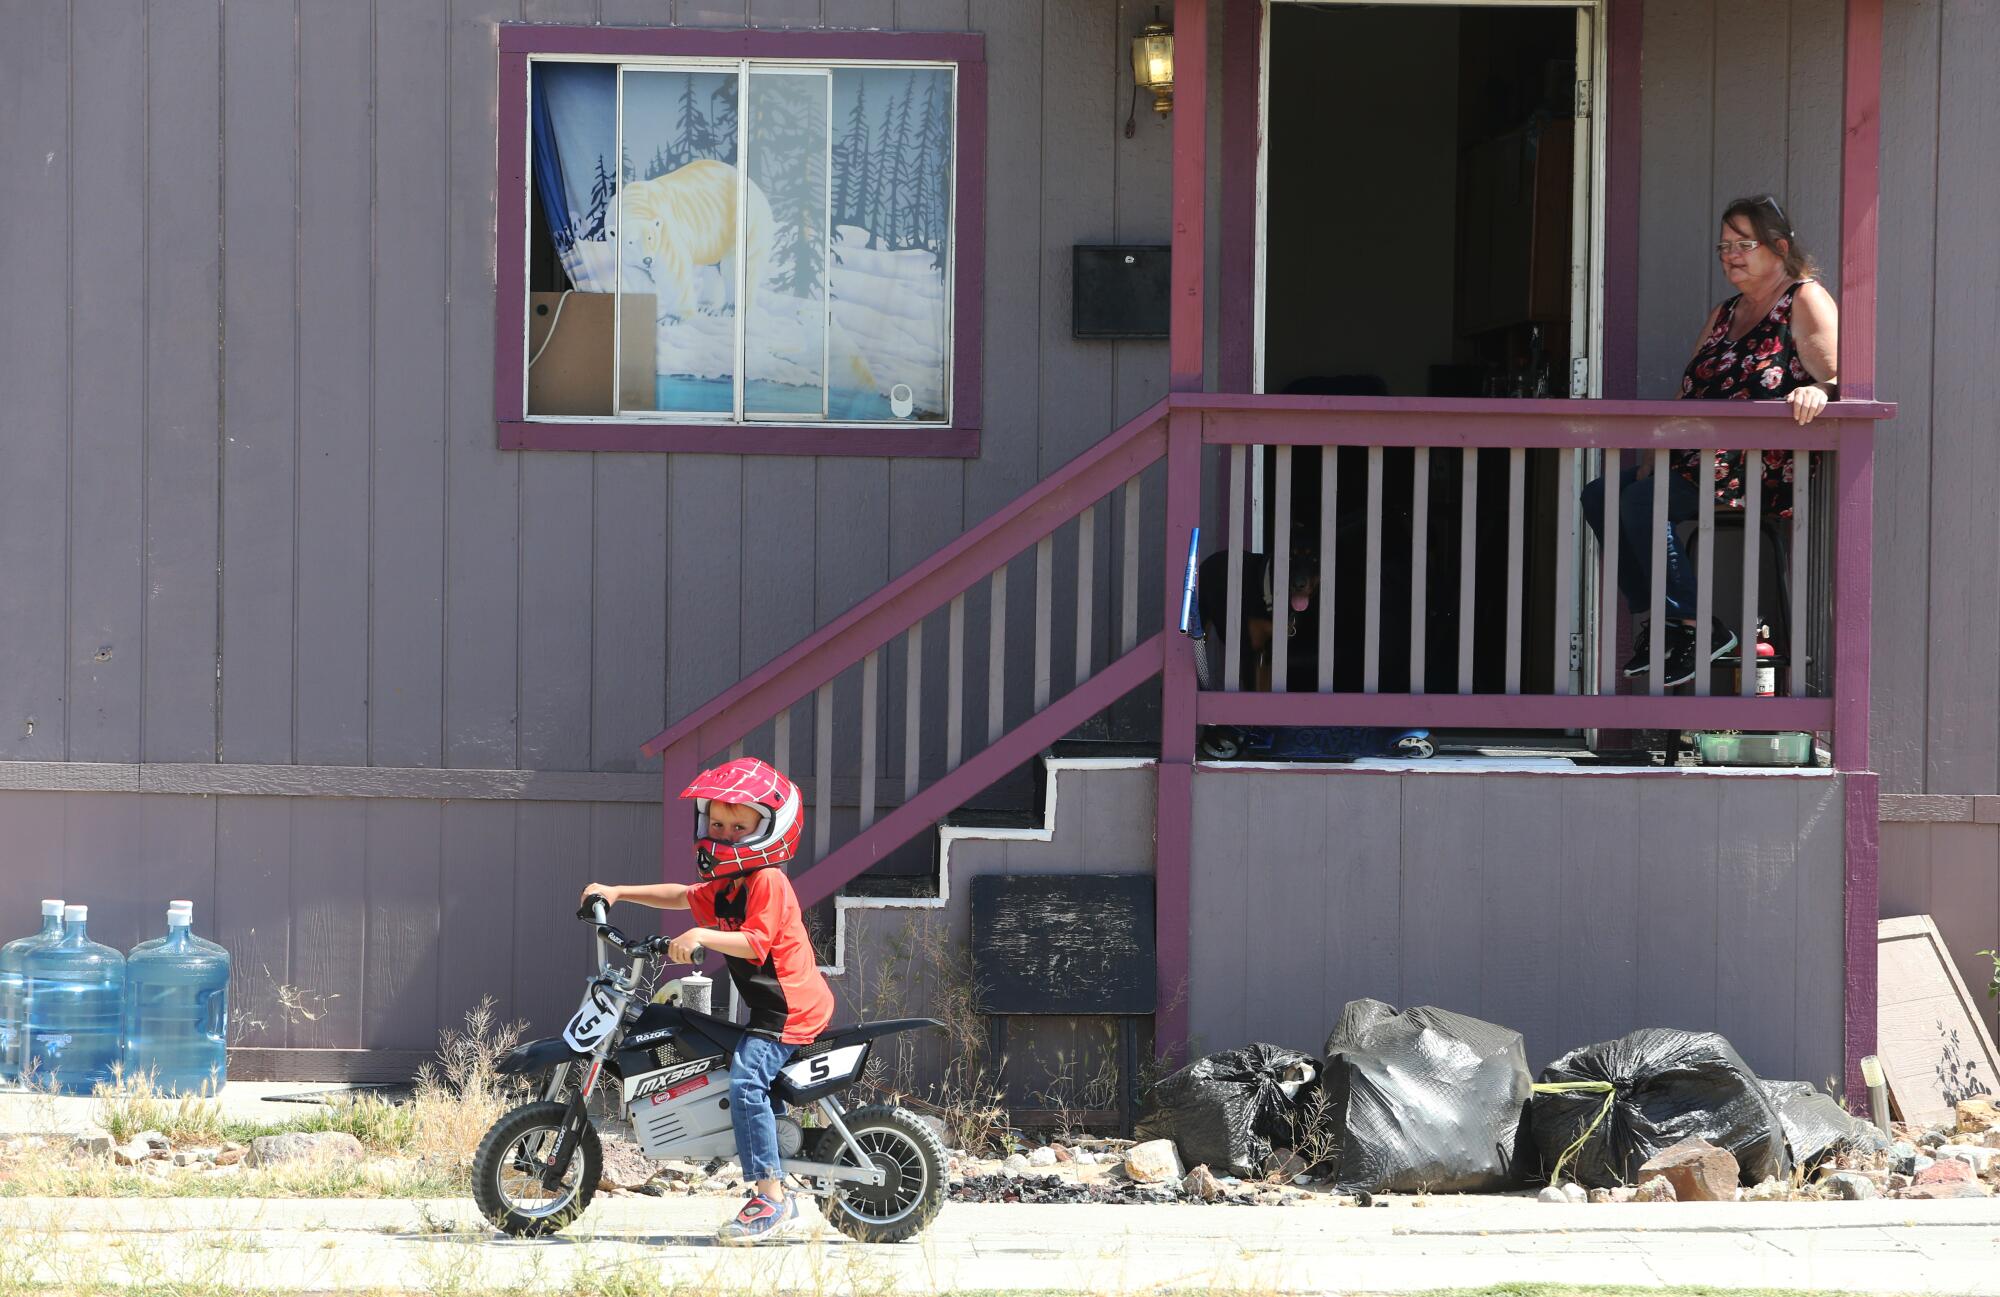 A woman leans on a porch railing as she watches a young boy on a bicycle.